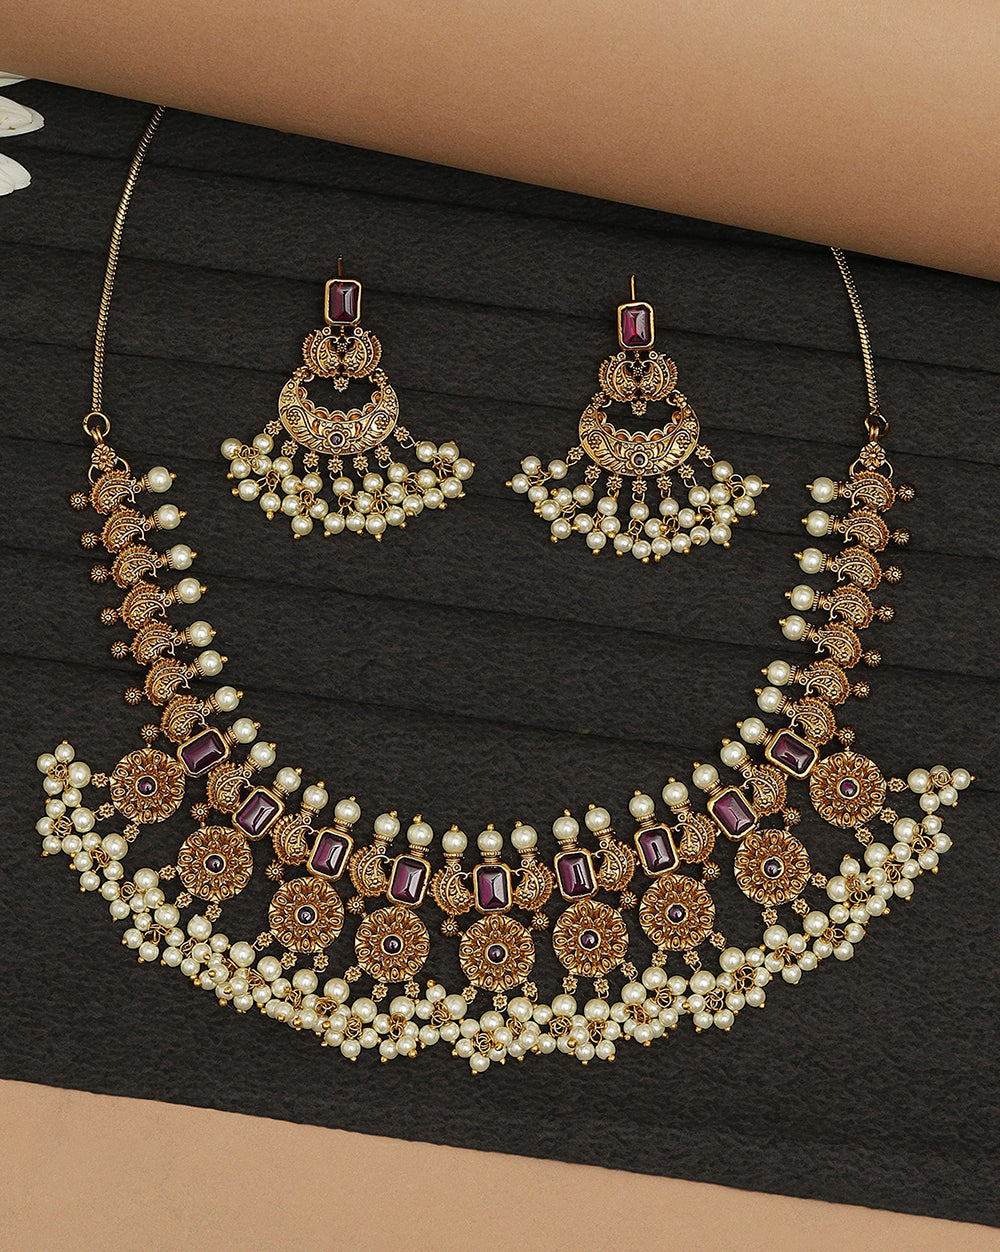 Women's Paisley Motifs Cz Gems And Faux Pearls Gold Toned Brass Jewellery Set - Voylla